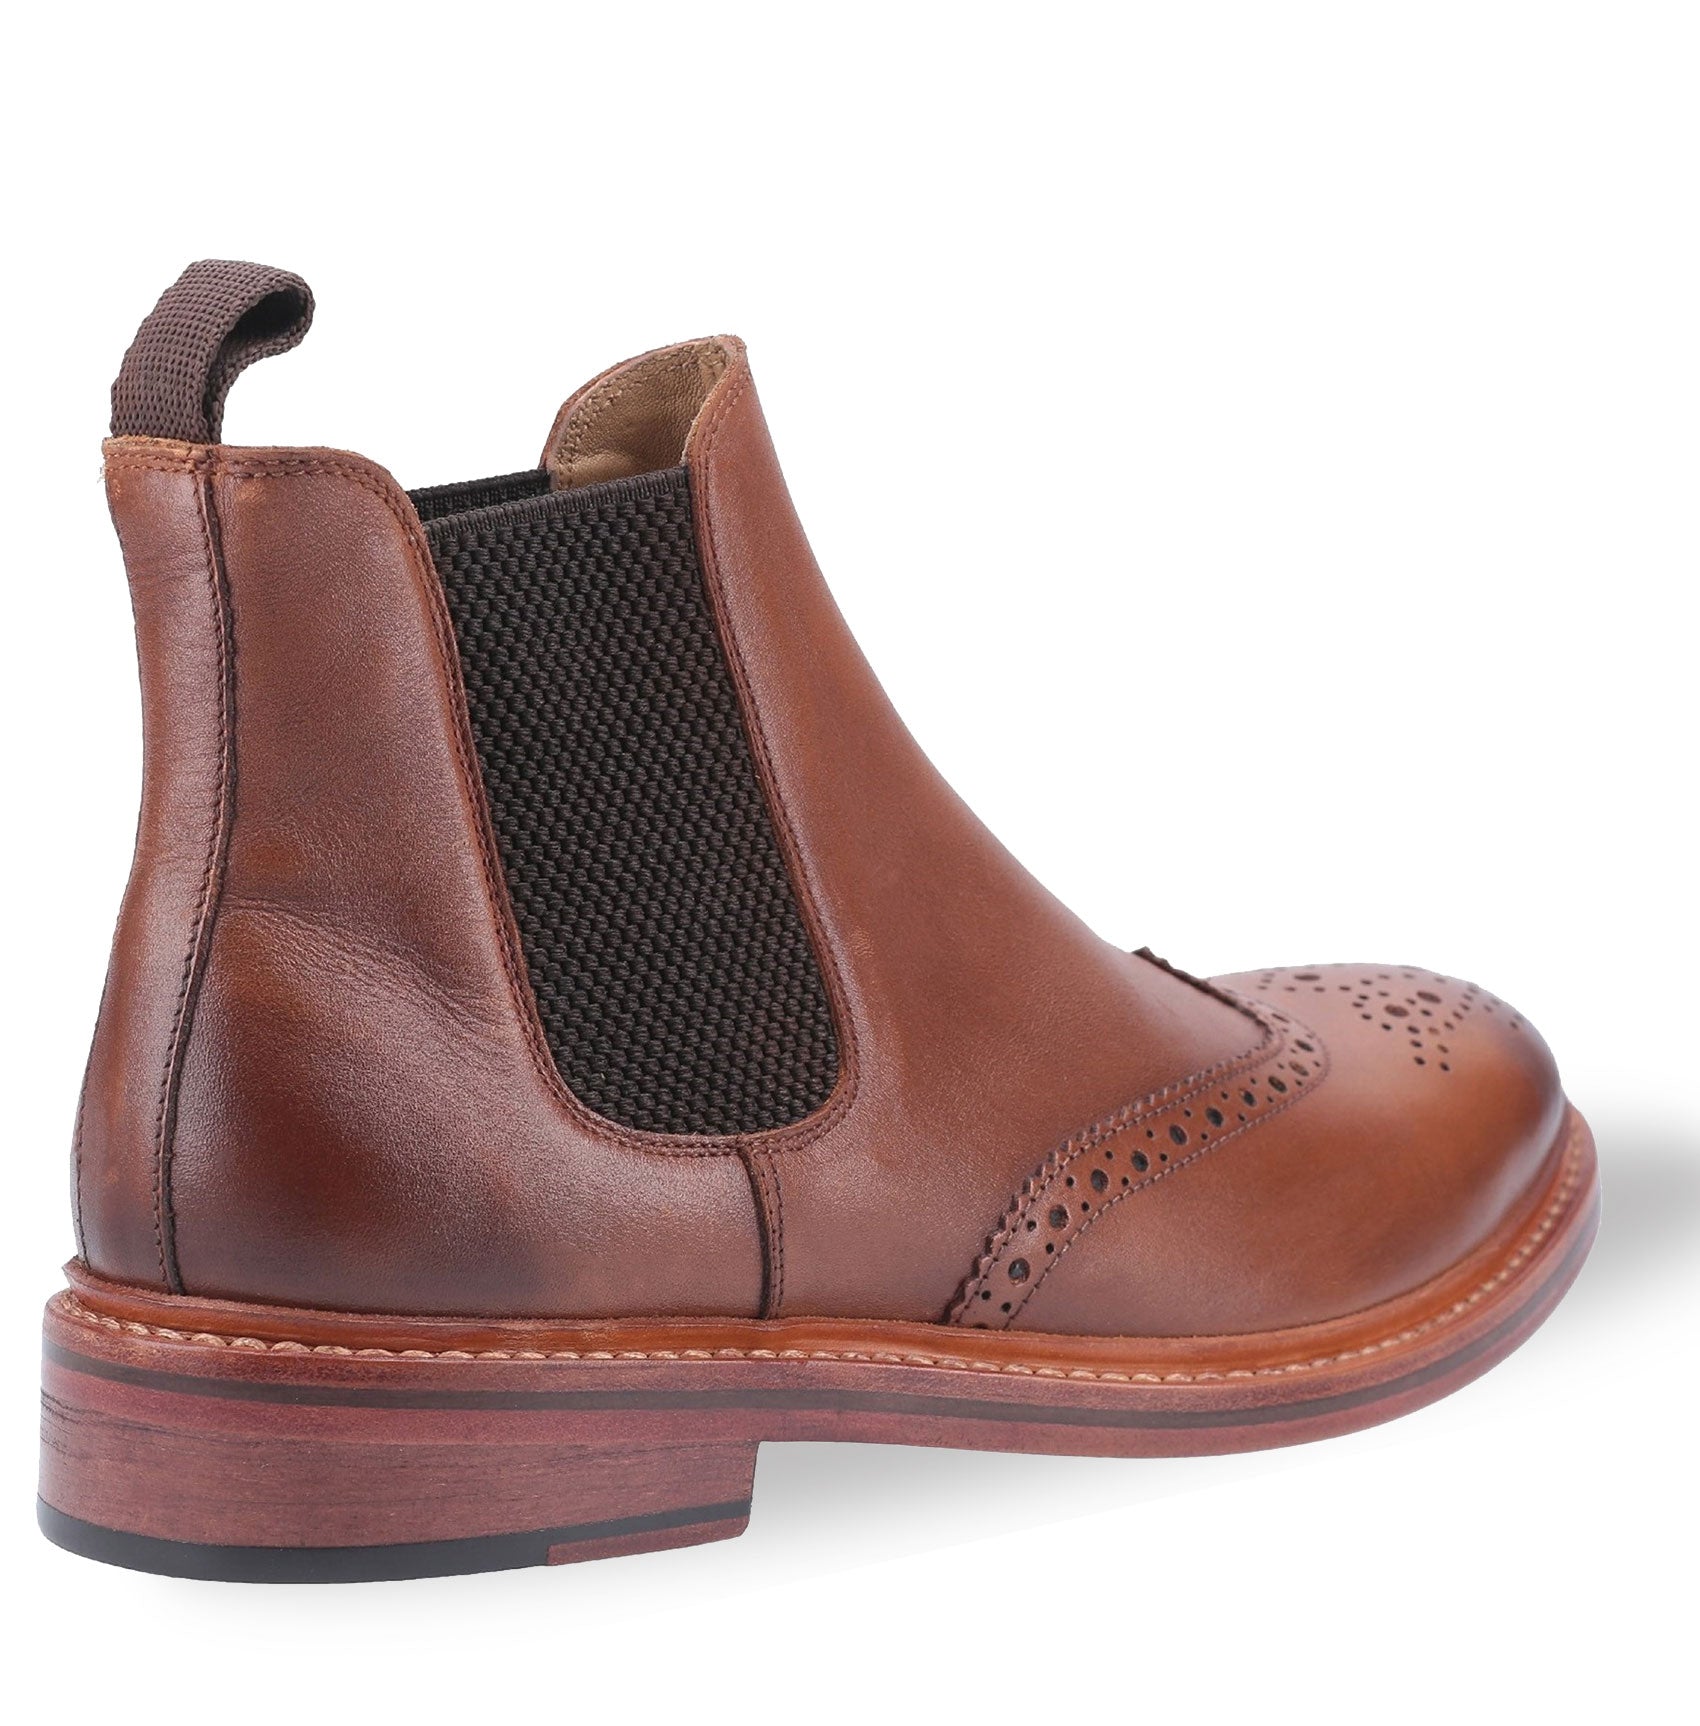 Brown Tan Cotswold Siddington Leather Brogue Chelsea Boot 